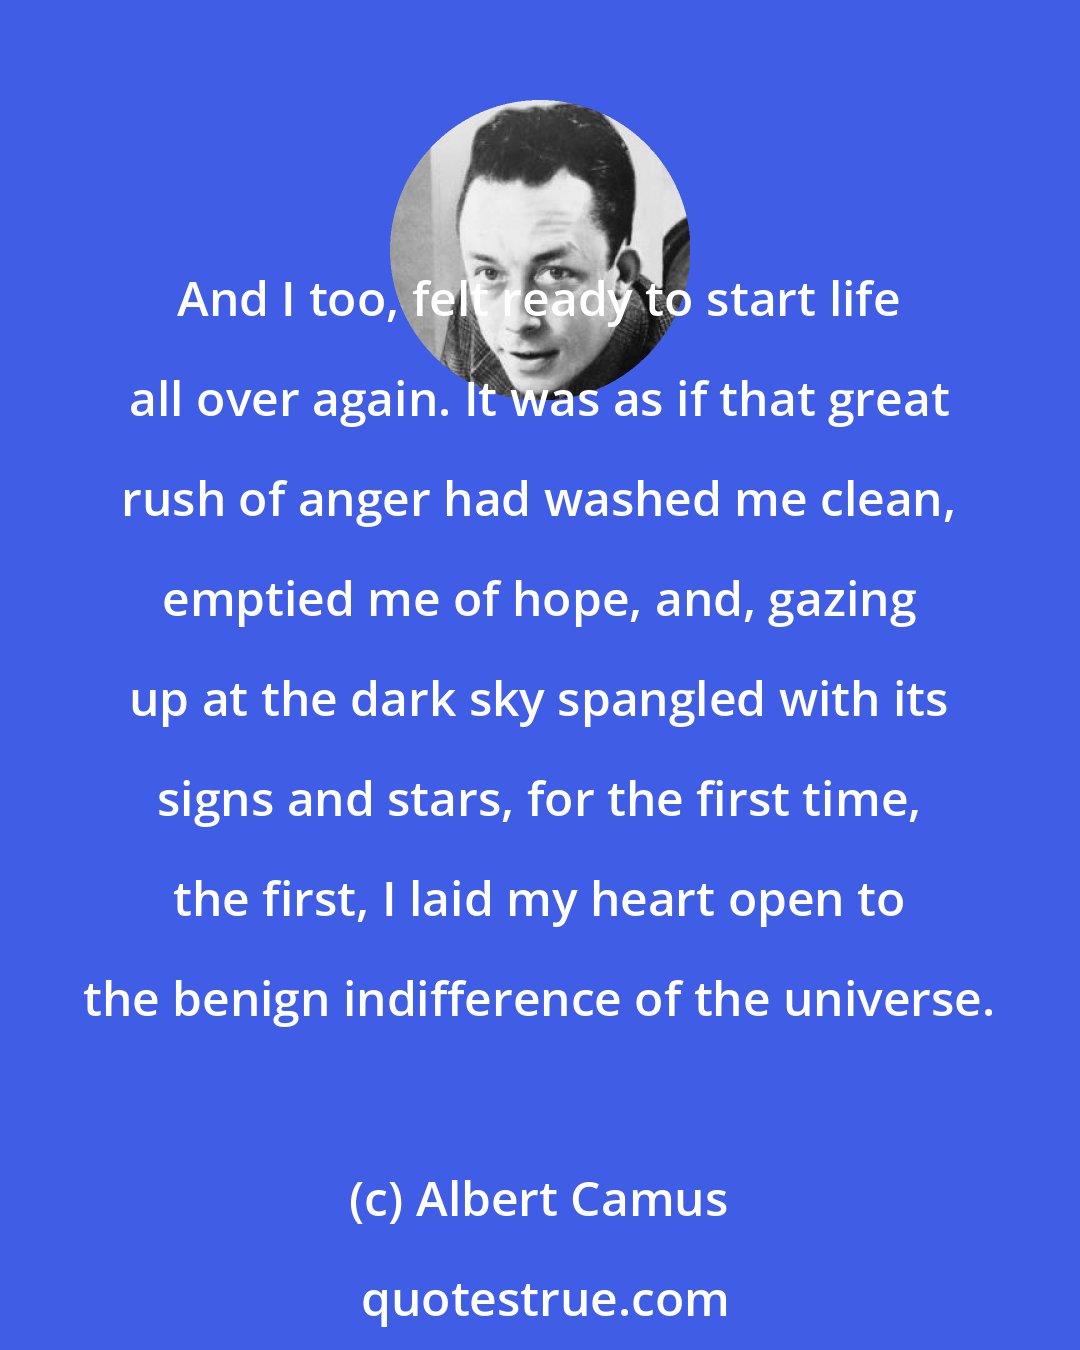 Albert Camus: And I too, felt ready to start life all over again. It was as if that great rush of anger had washed me clean, emptied me of hope, and, gazing up at the dark sky spangled with its signs and stars, for the first time, the first, I laid my heart open to the benign indifference of the universe.